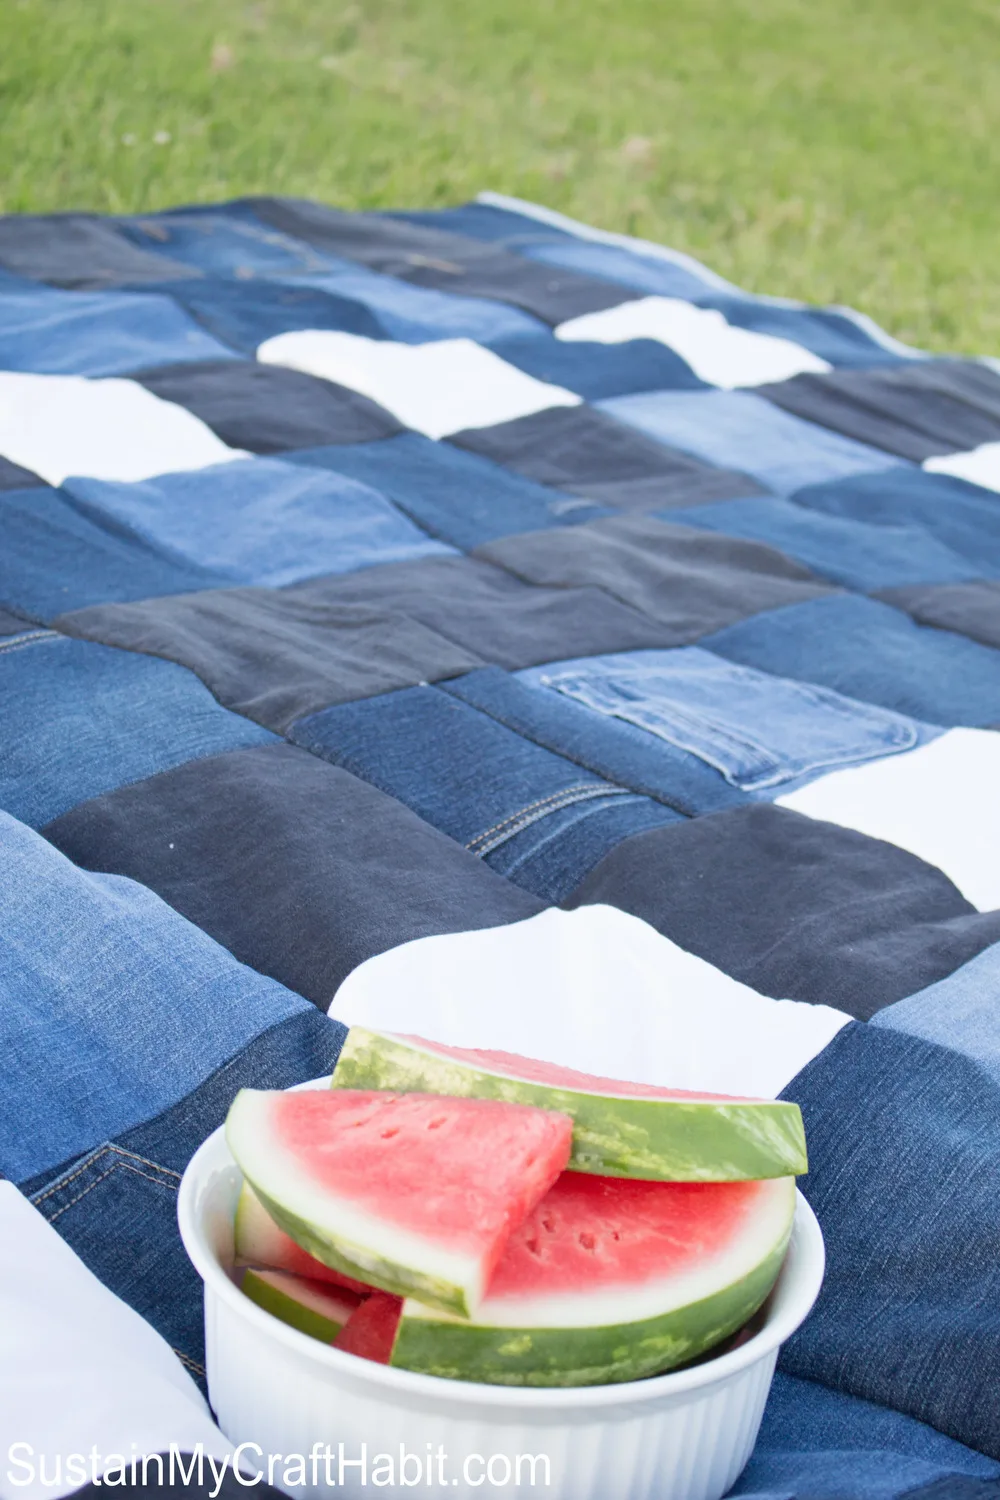 A bowl filled with watermelon resting on the new picnic blanket